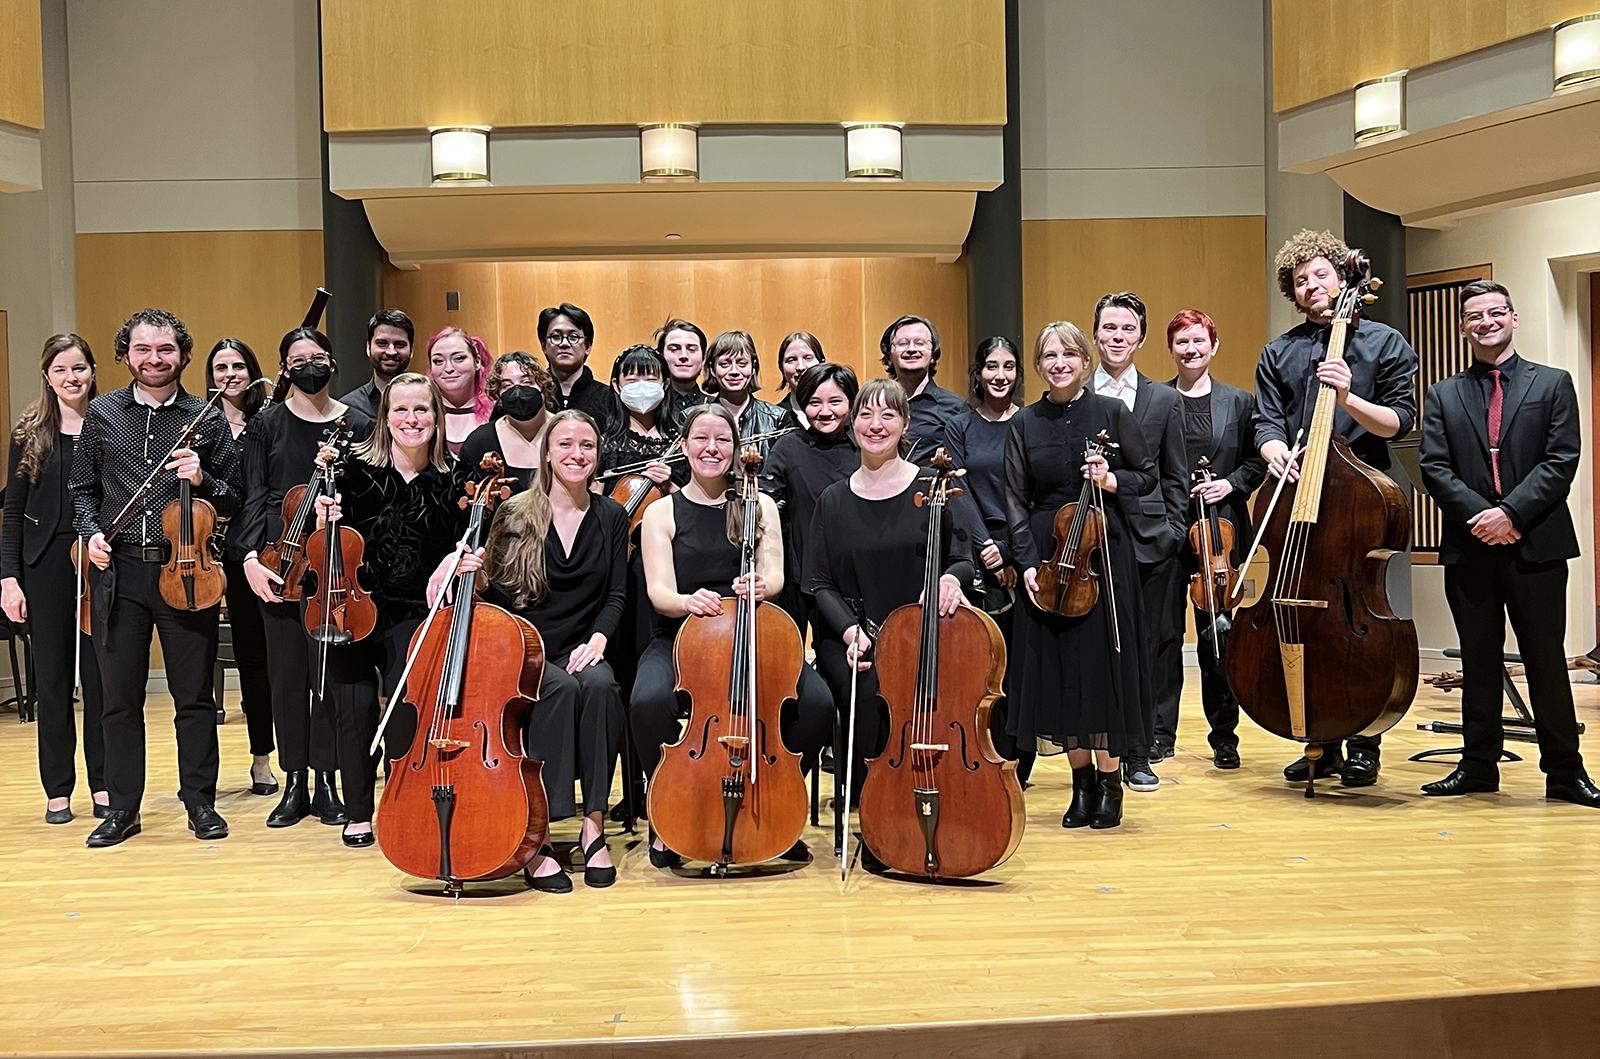 The umd school of music early music initiative. The group is sitting on the gildenhorn stage in concert dress.